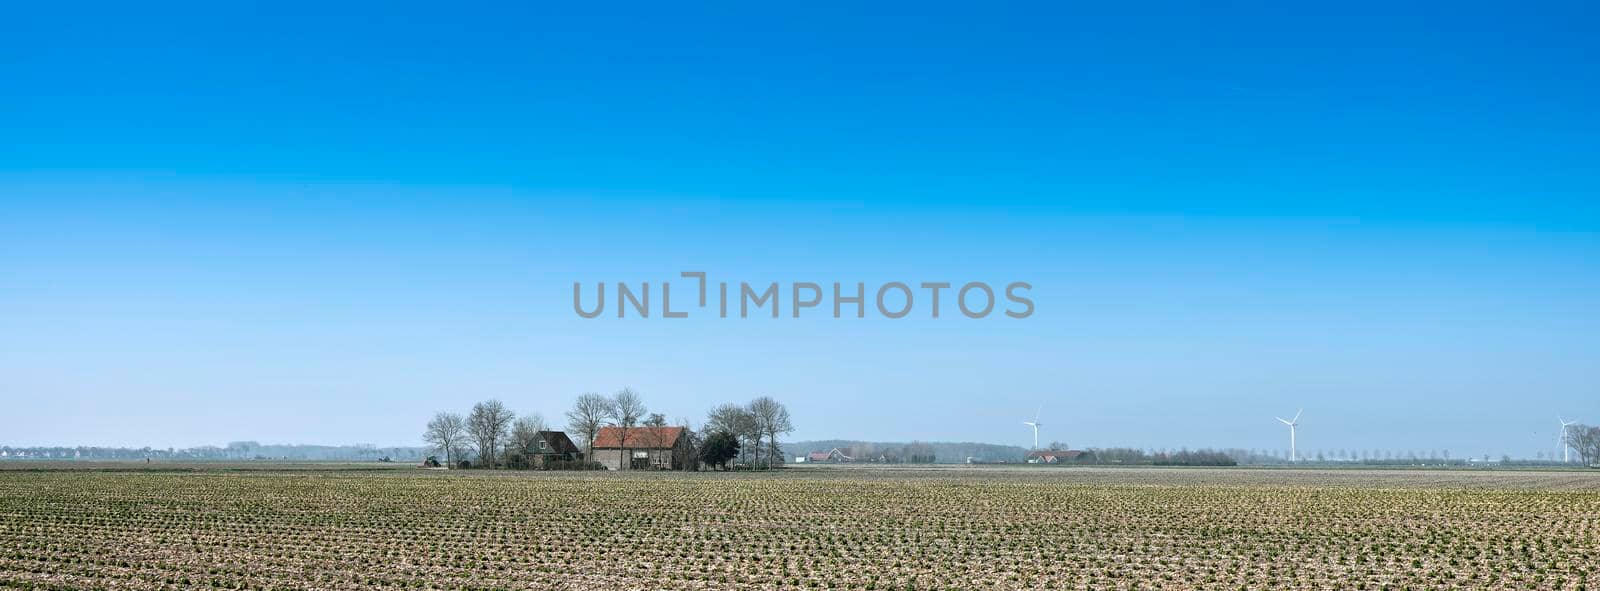 house and agricultural fields in dutch province of zeeland under blue sky early spring in the netherlands